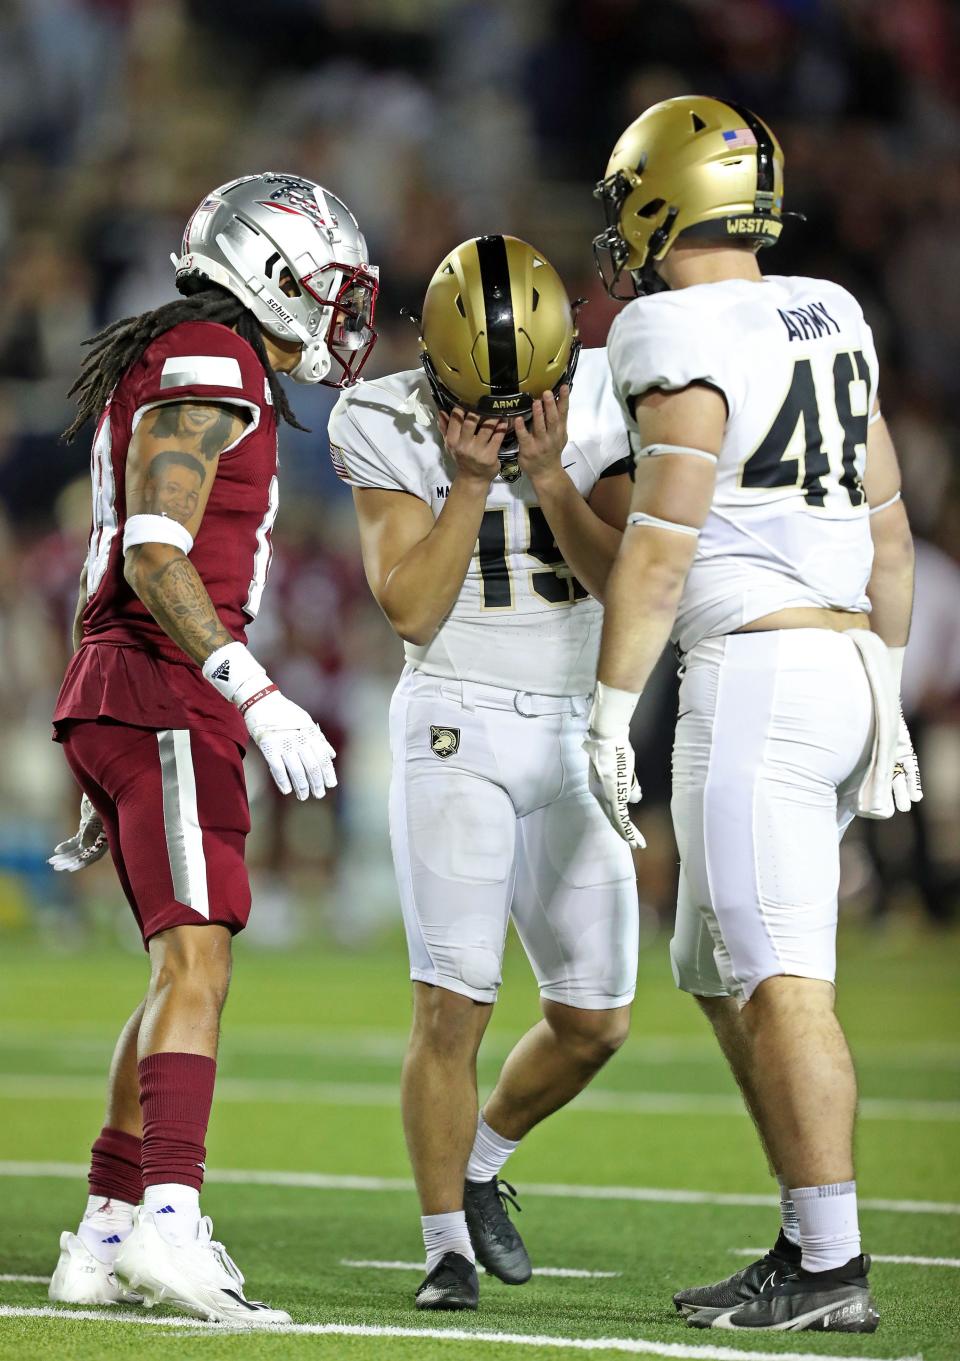 Army kicker Quinn Maretzki (15) reacts after missing a potential game-winning field goal against Troy. DANNY WILD/USA TODAY Sports